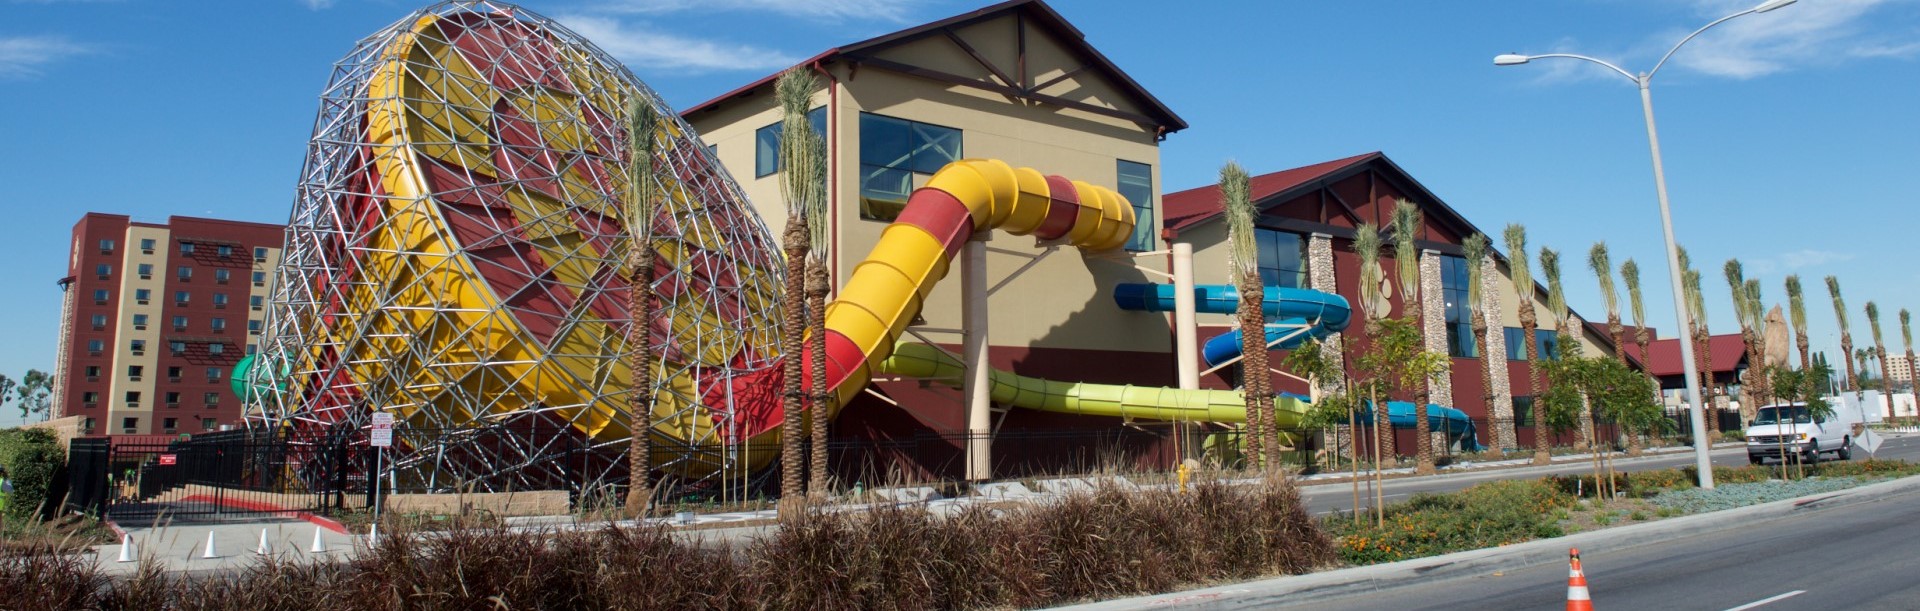 Great wolf lodge southern california